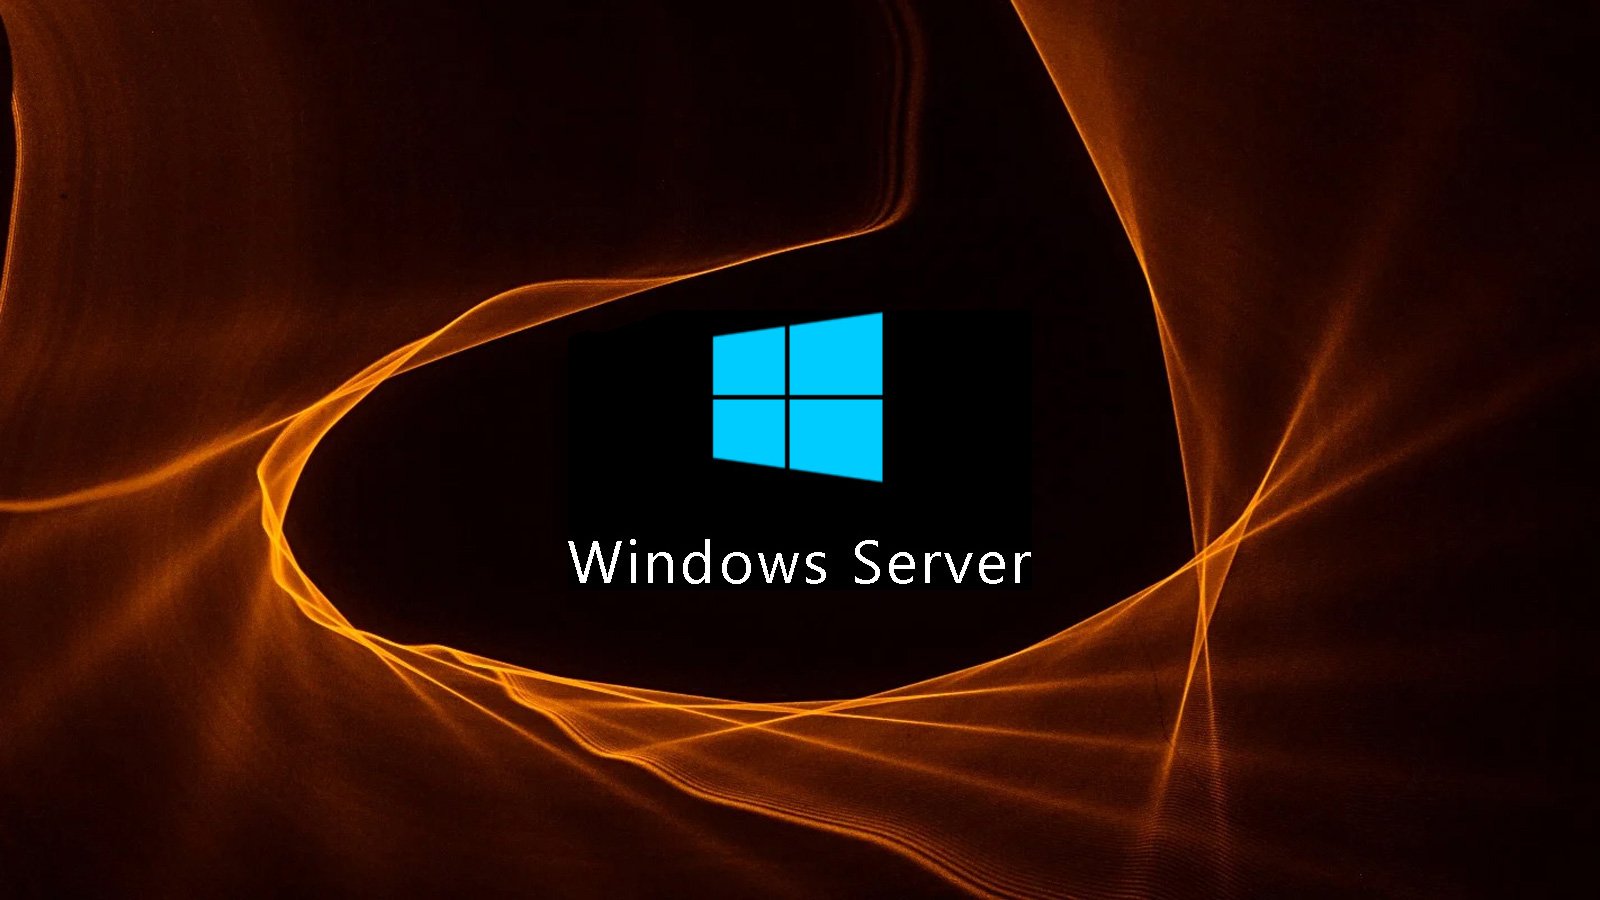 Microsoft has pulled the January Windows Server cumulative updates after critical bugs caused domain controllers to reboot, Hyper-V to not work, and R